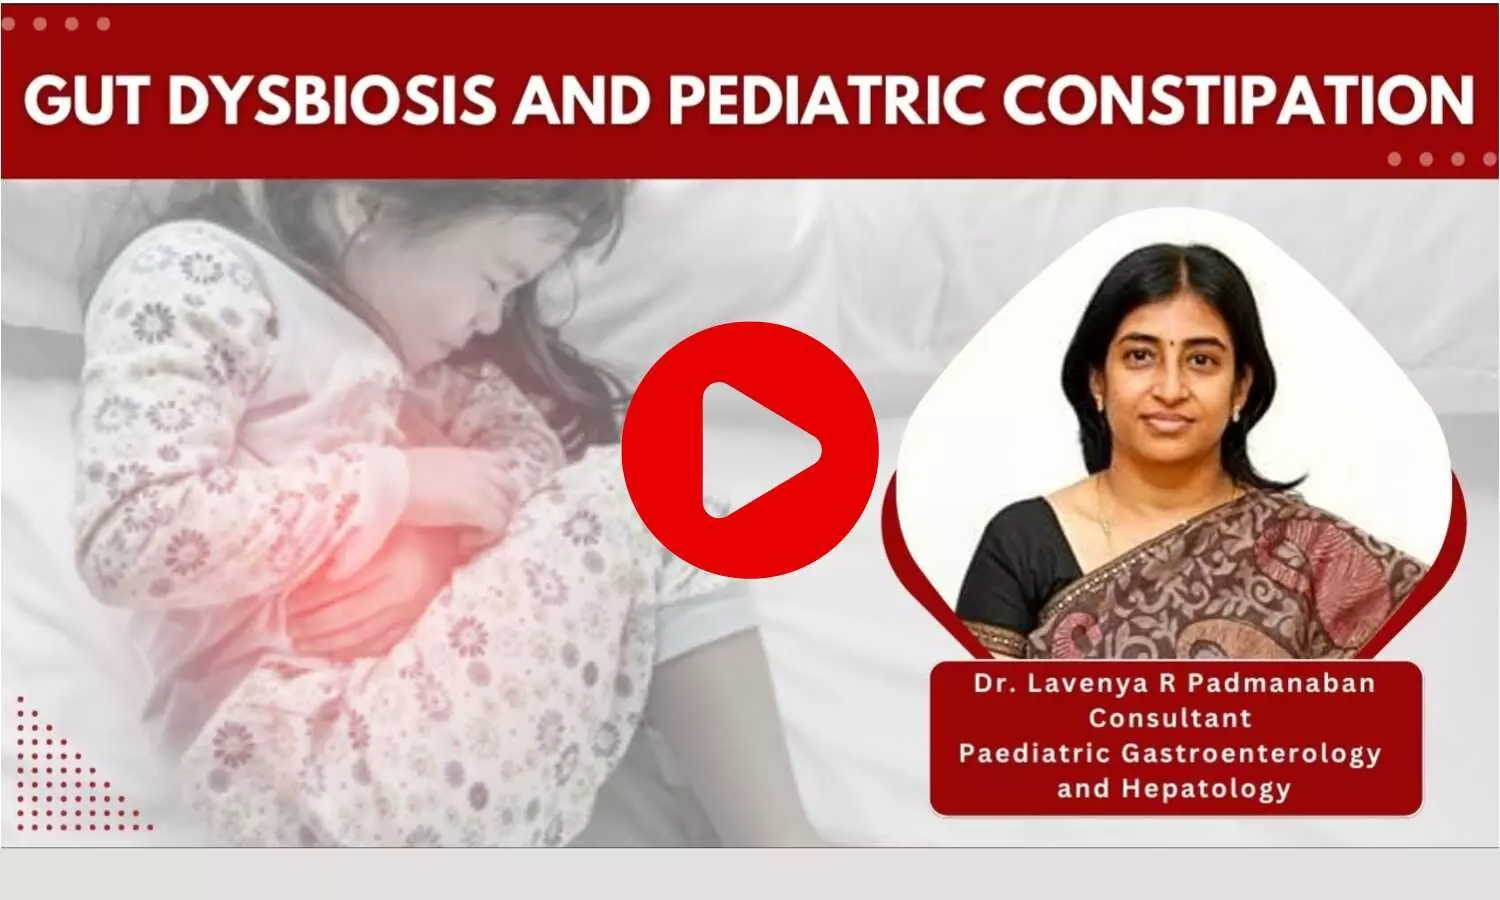 The interrelationship between gut flora imbalance and stomach upset in children - Ft Dr. Lavenya R Padmanaban